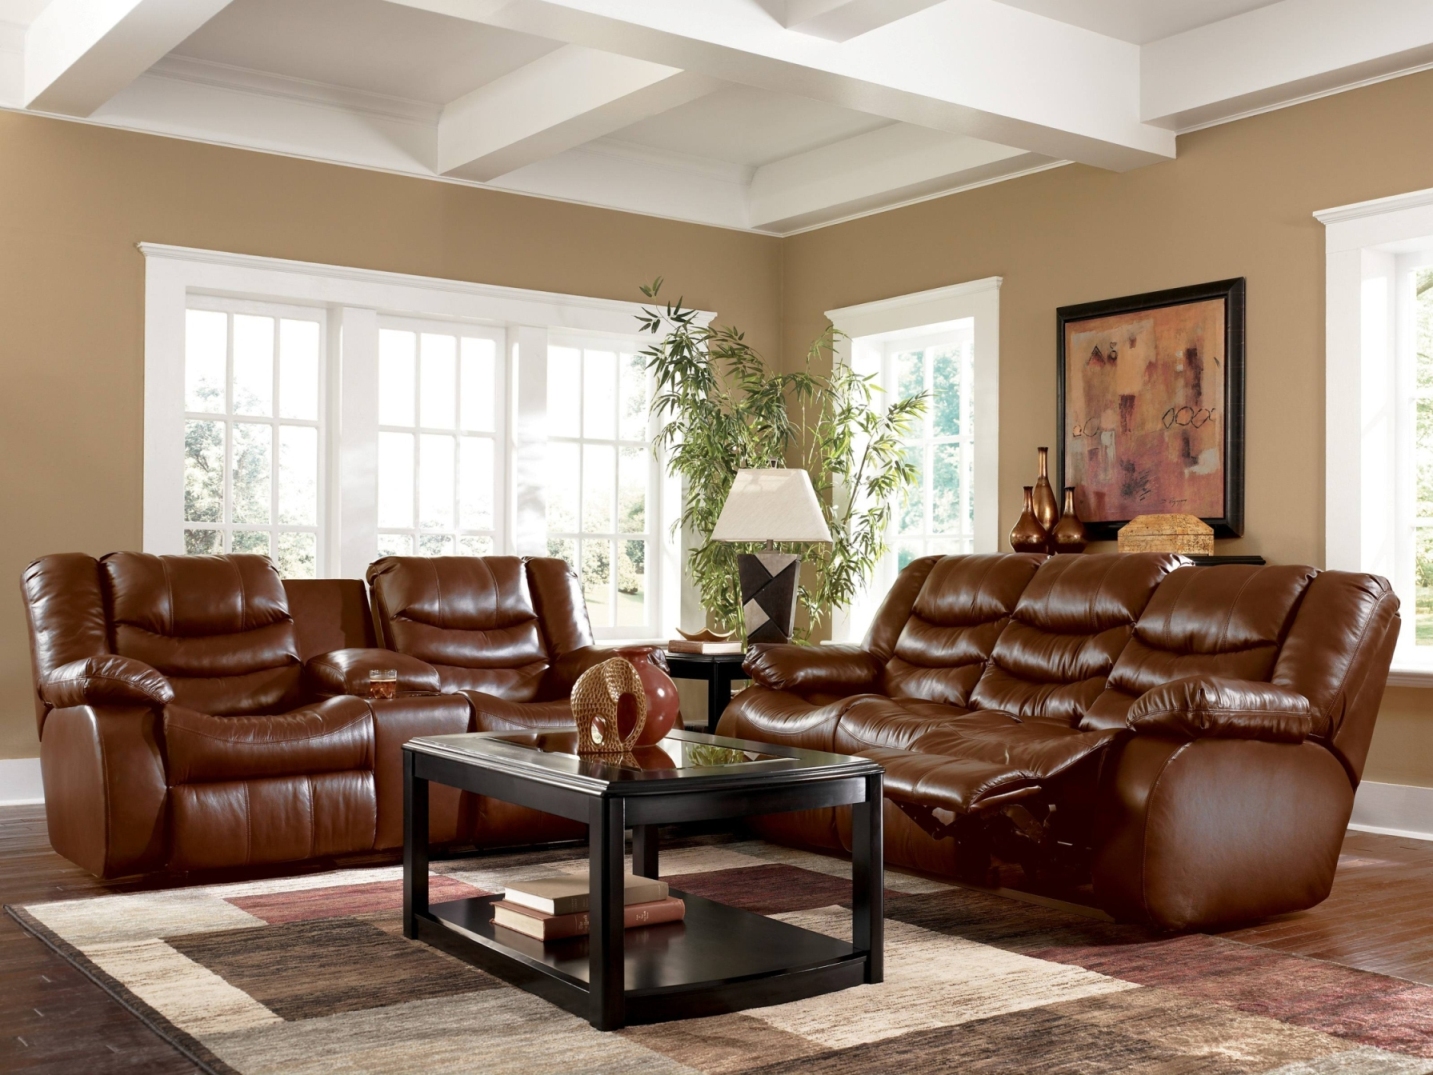 White And Brown Distressed Living Room Furniture